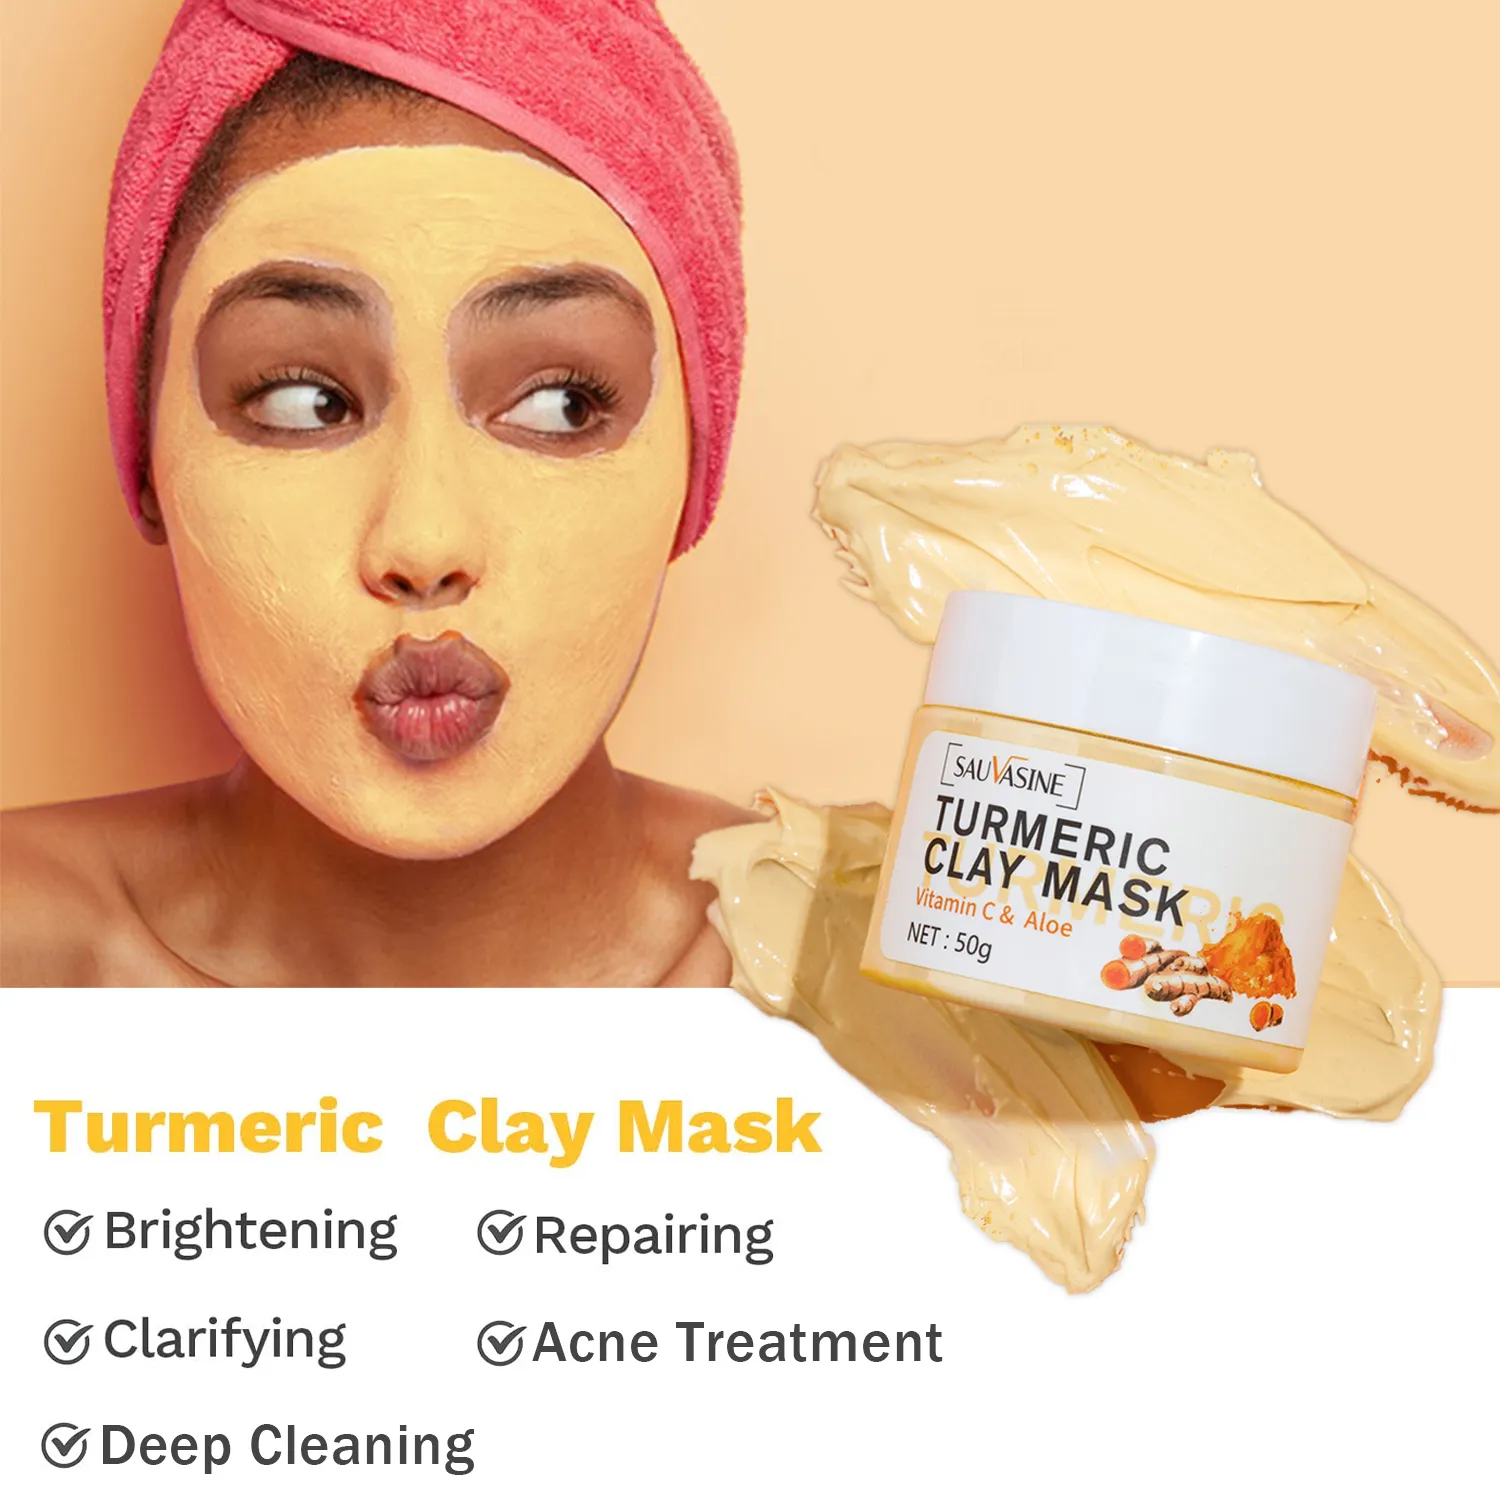 Professional Turmeric Mud Clay Face Mask Whitening Vitamin C Acne Treatment Dark Spots Remover Deep Cleaning Brightening Cream auquest facial masks blackhead black dots remover face mask acne treatment pink deep cleansing whitening clay mask skin care